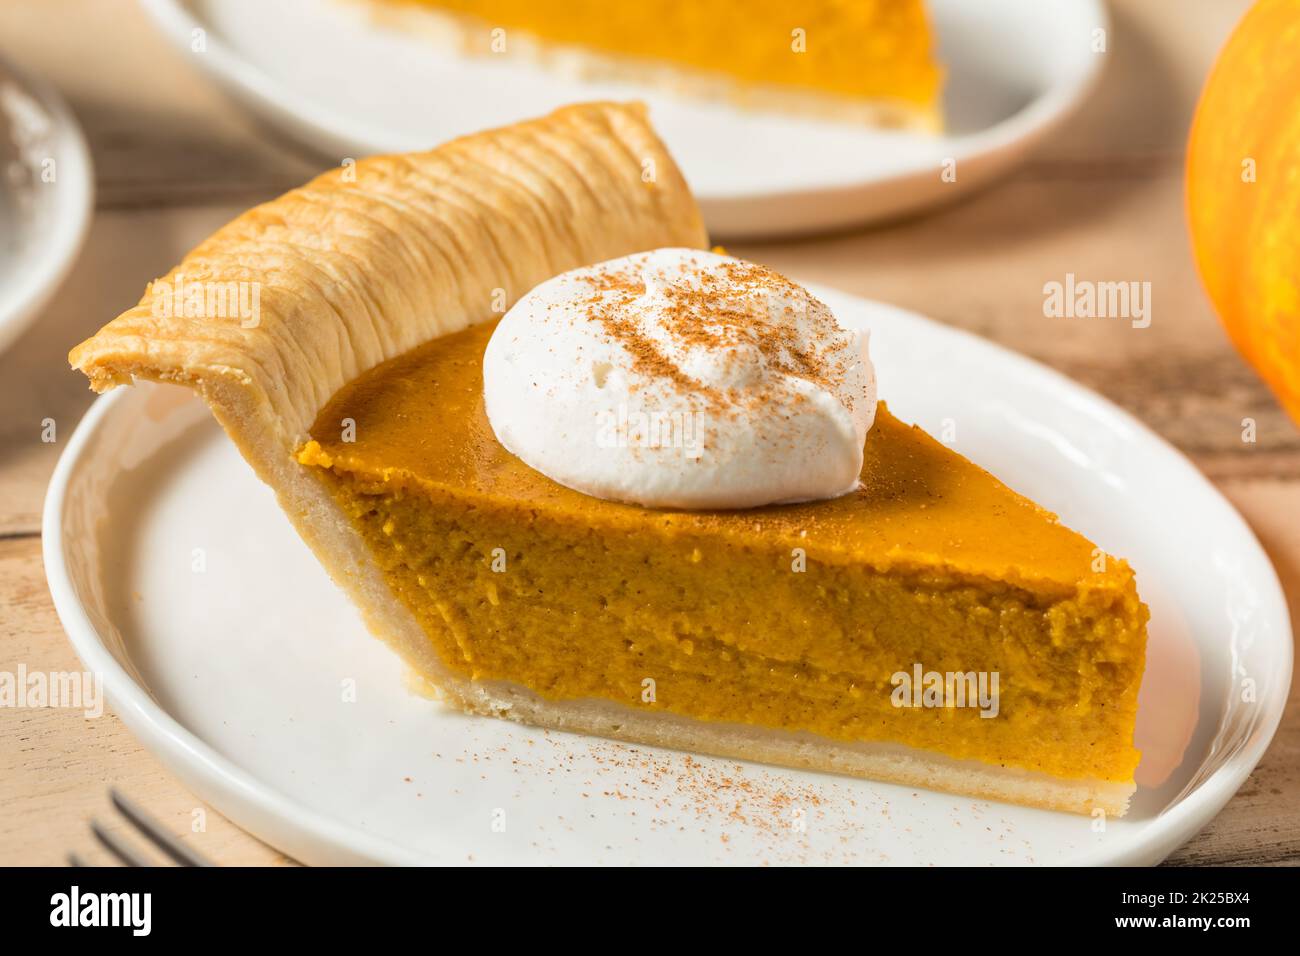 Homemade Thanksgiving Pumpkin Pie with Whipped Cream and Spice Stock Photo